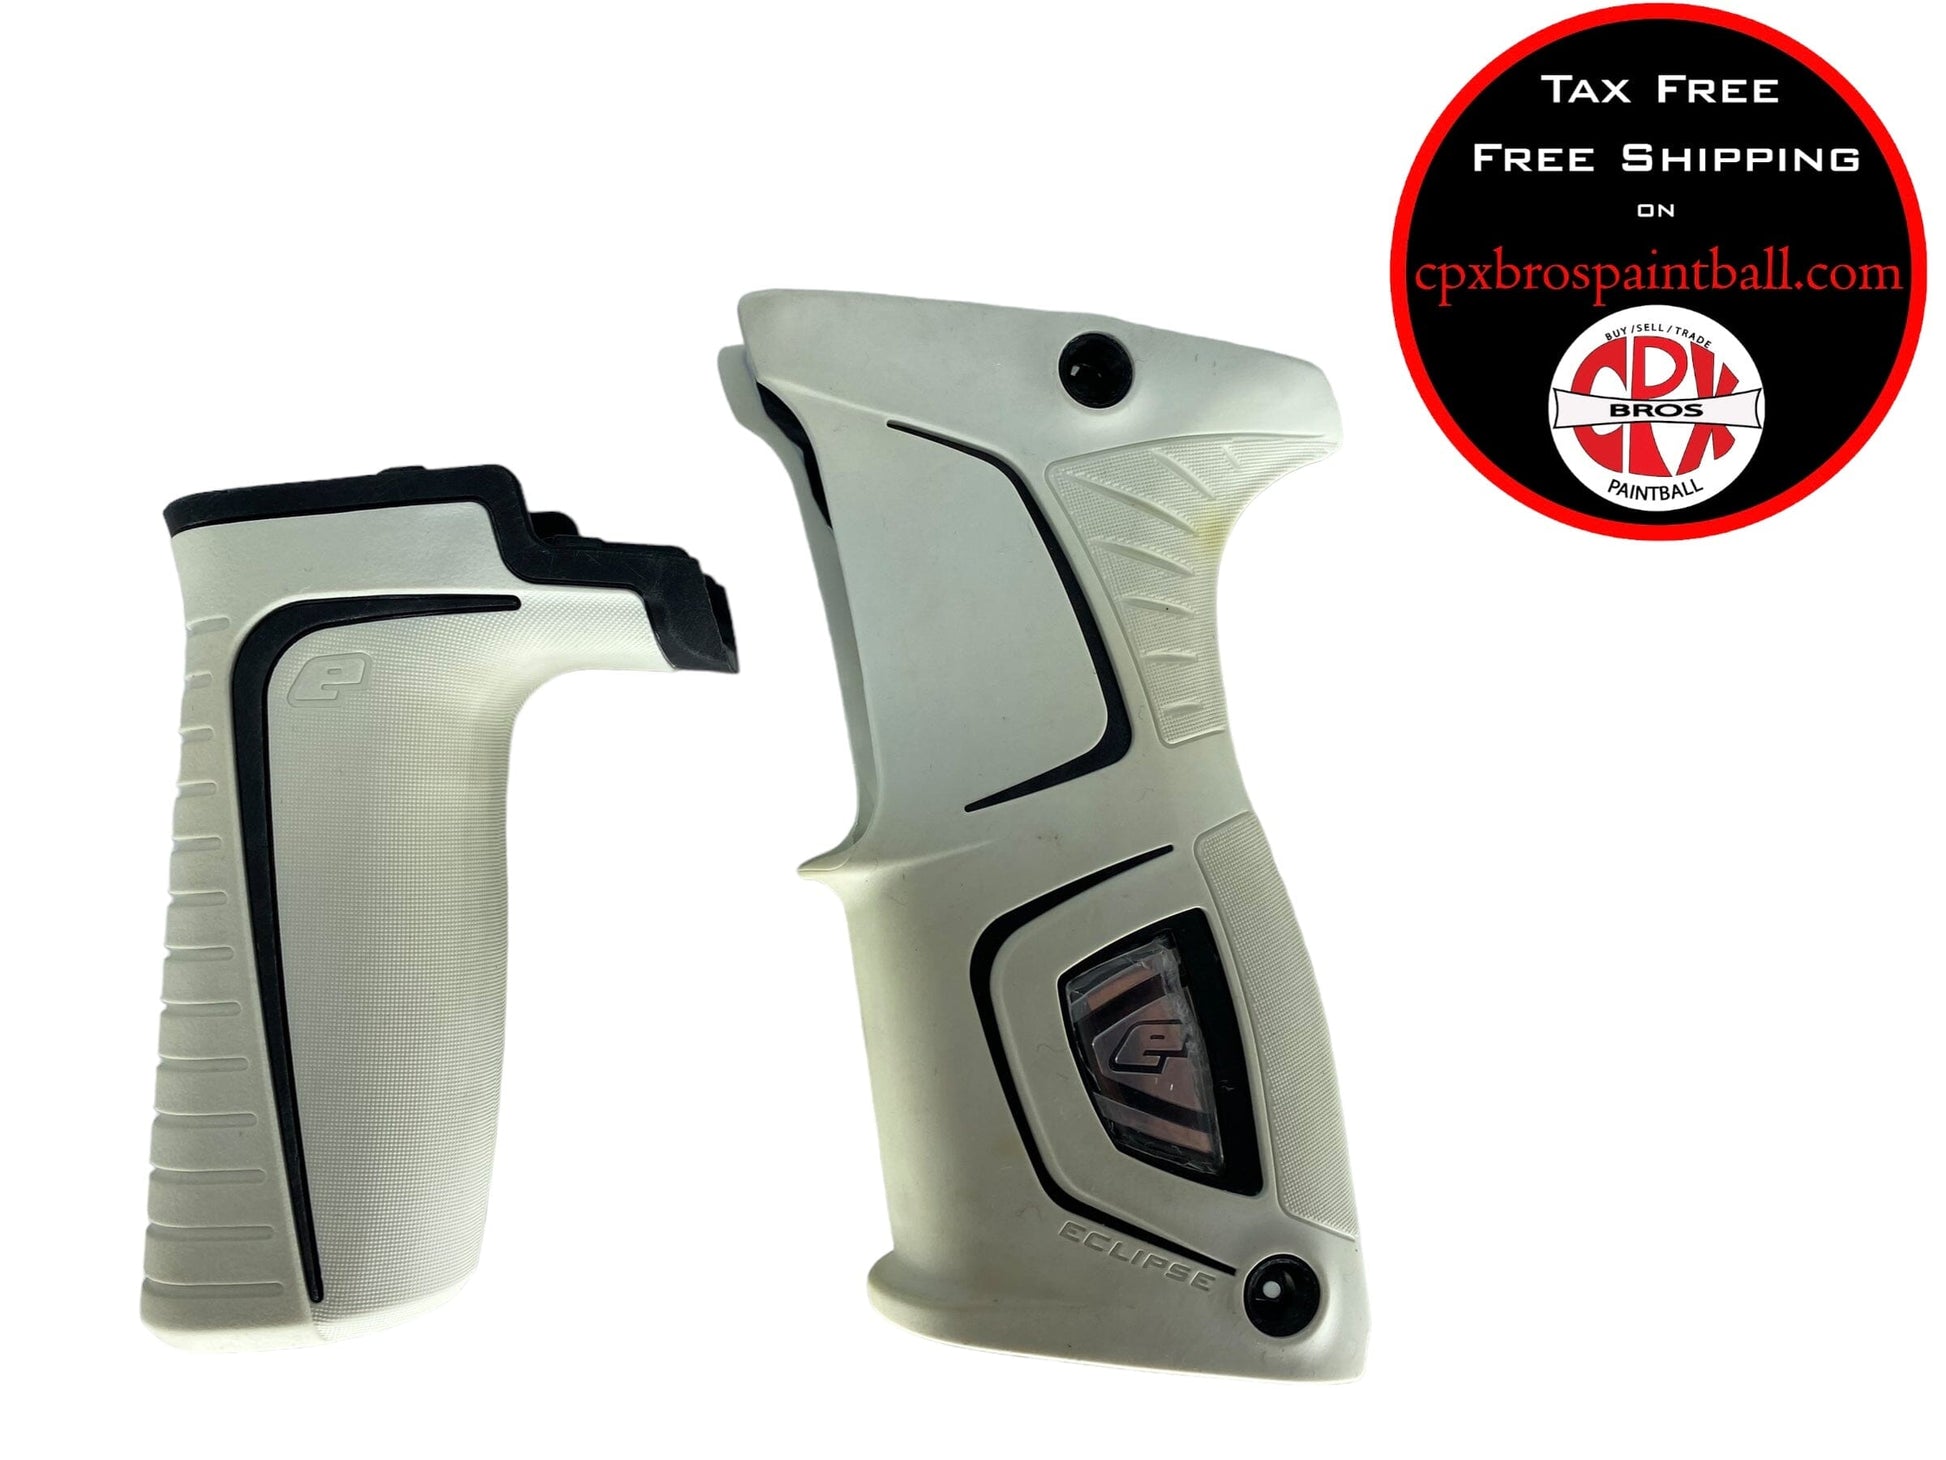 Used Planet Eclipse Gtek 170r Grips White Paintball Gun from CPXBrosPaintball Buy/Sell/Trade Paintball Markers, New Paintball Guns, Paintball Hoppers, Paintball Masks, and Hormesis Headbands